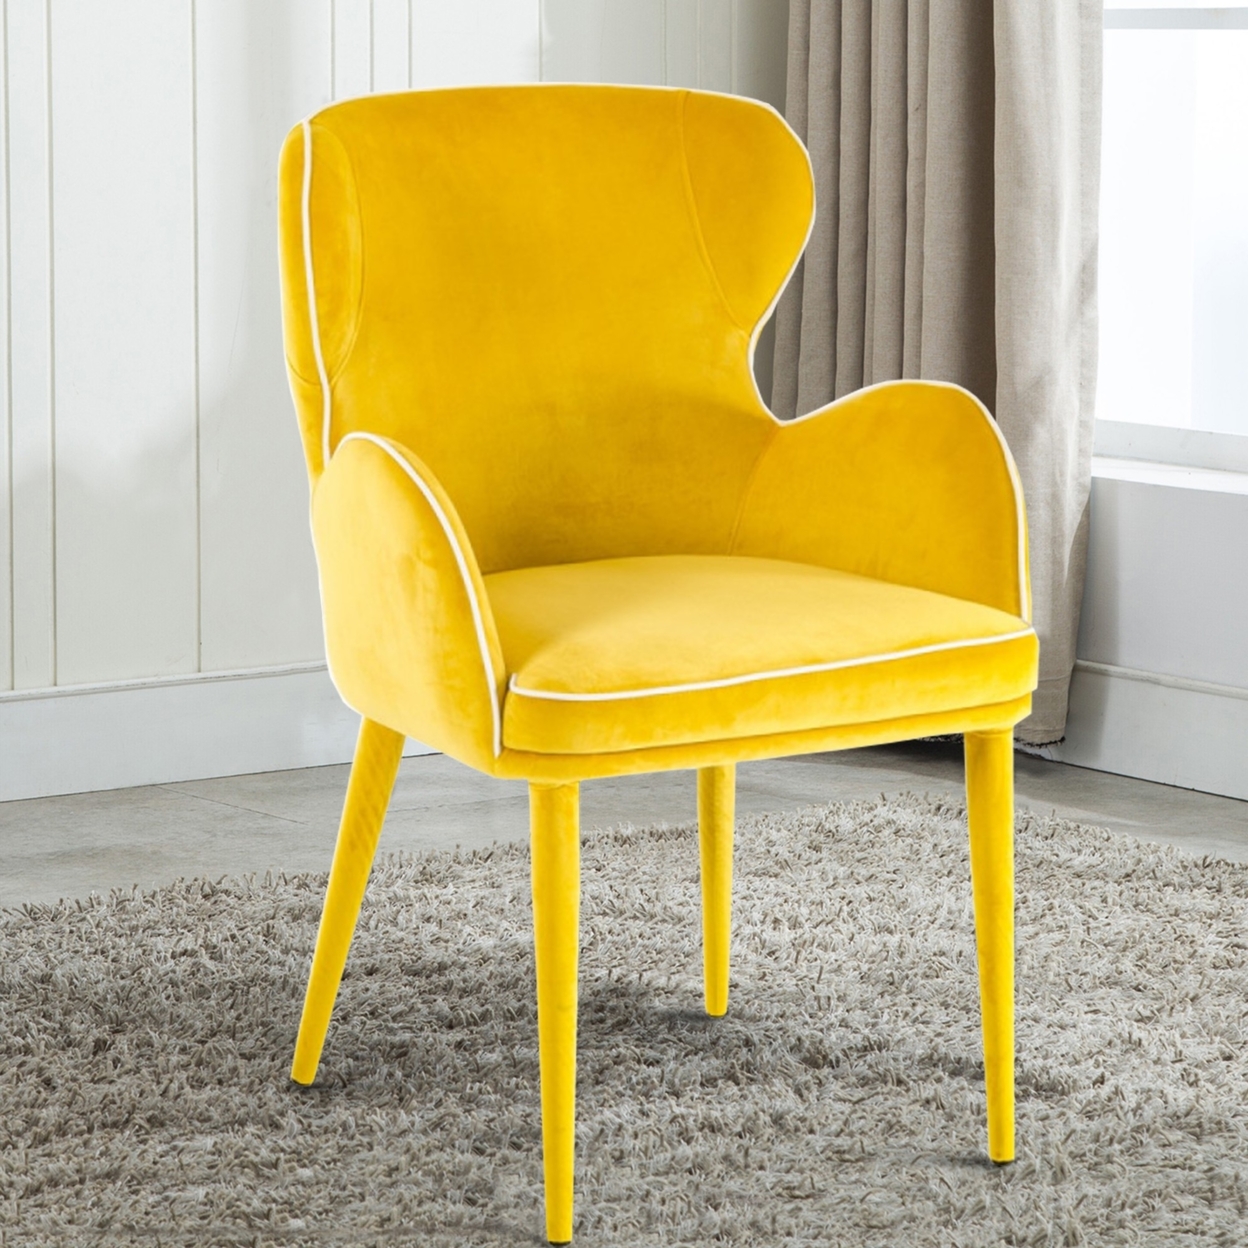 Fabric Upholstered Wing Back Design Dining Chair With High Curvy Arms, Yellow- Saltoro Sherpi